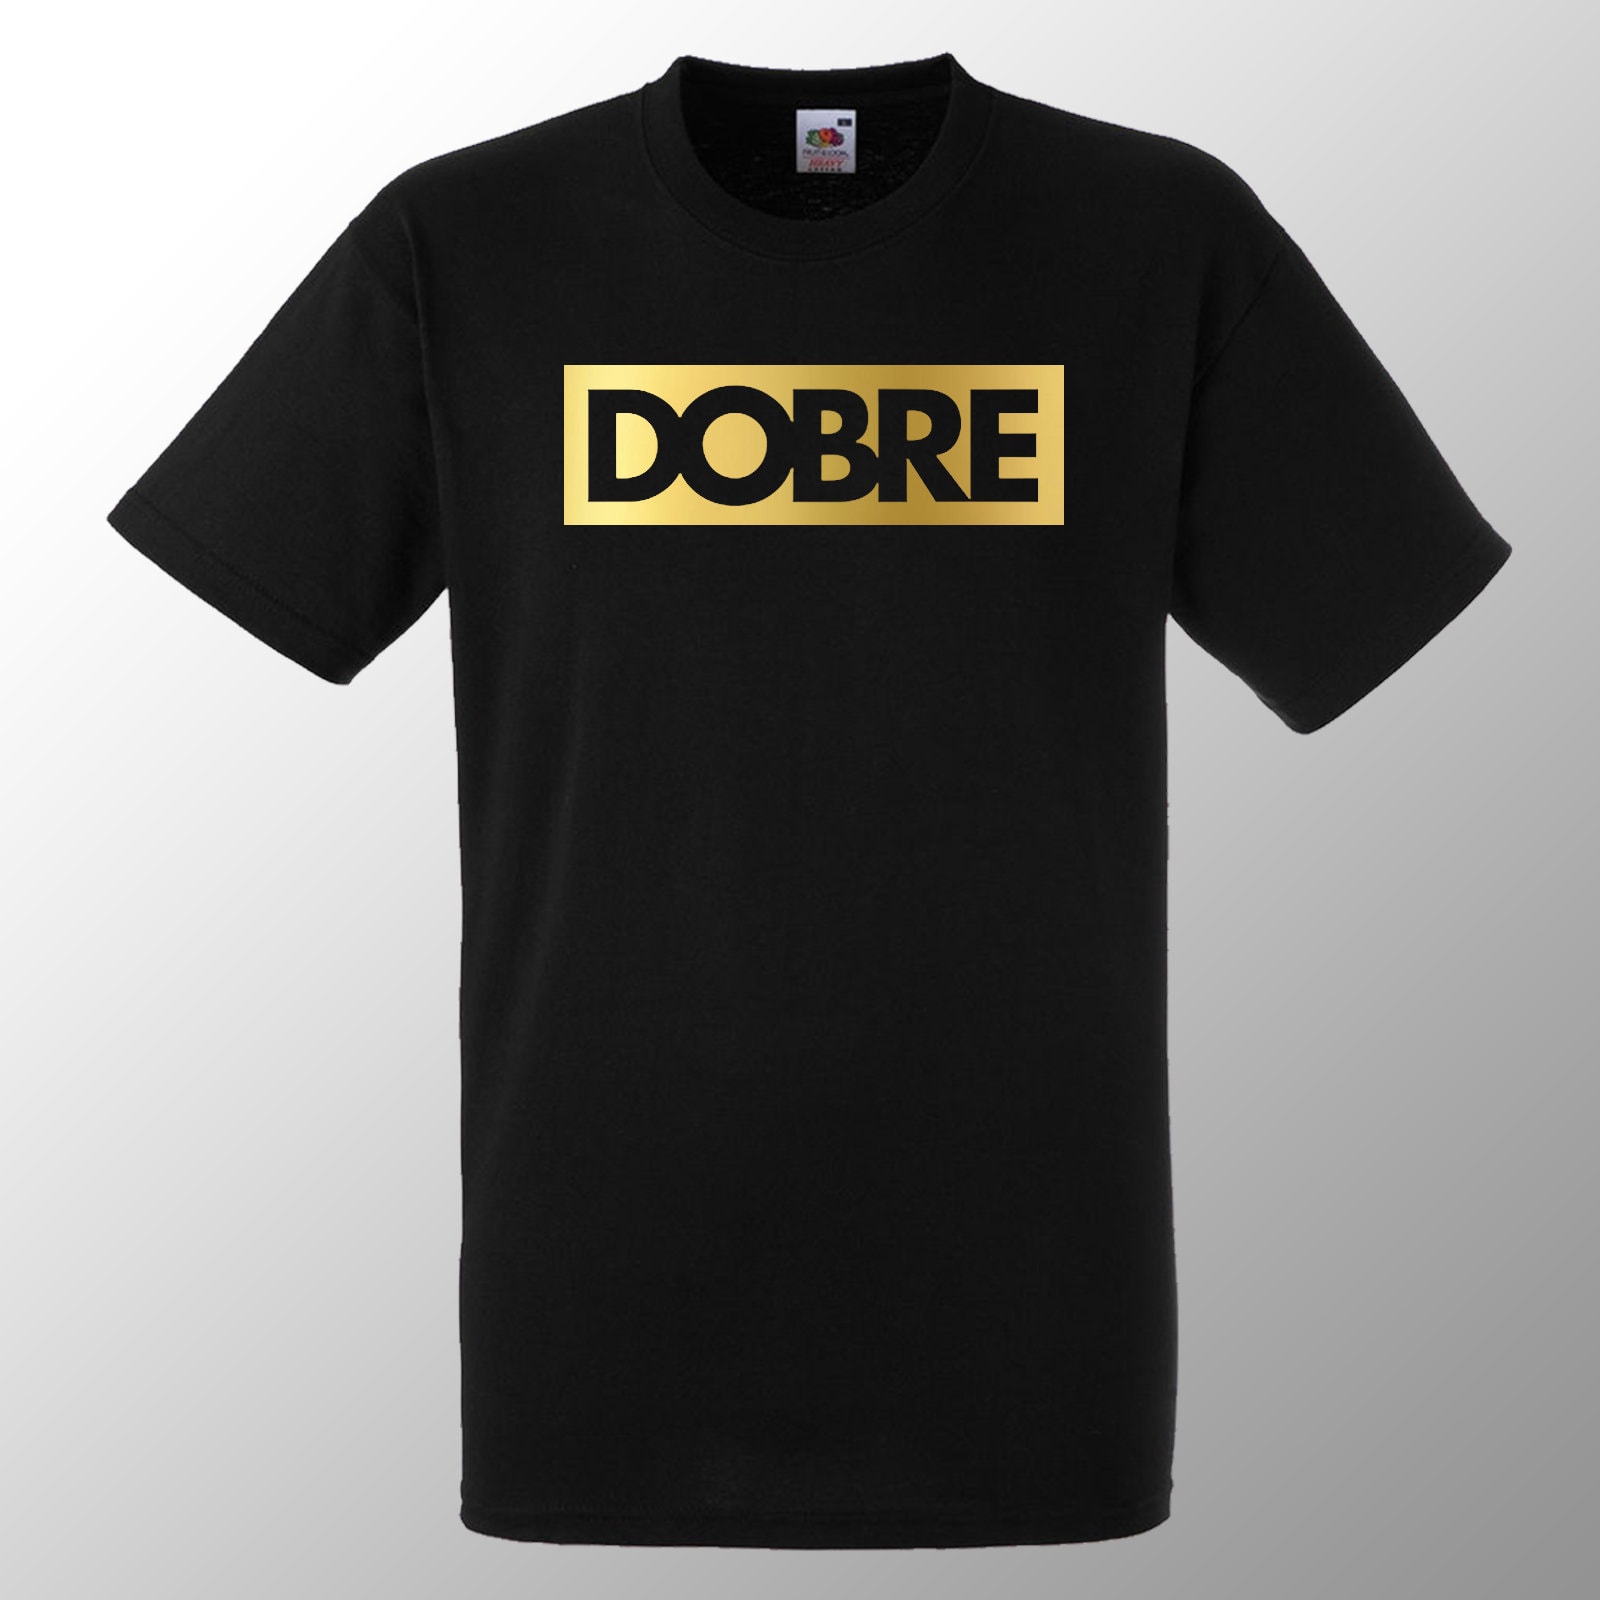 Dobre Brothers White T-shirt For Kids Gaming Gamer Youtuber Fan Size M 7-9 SALE! 